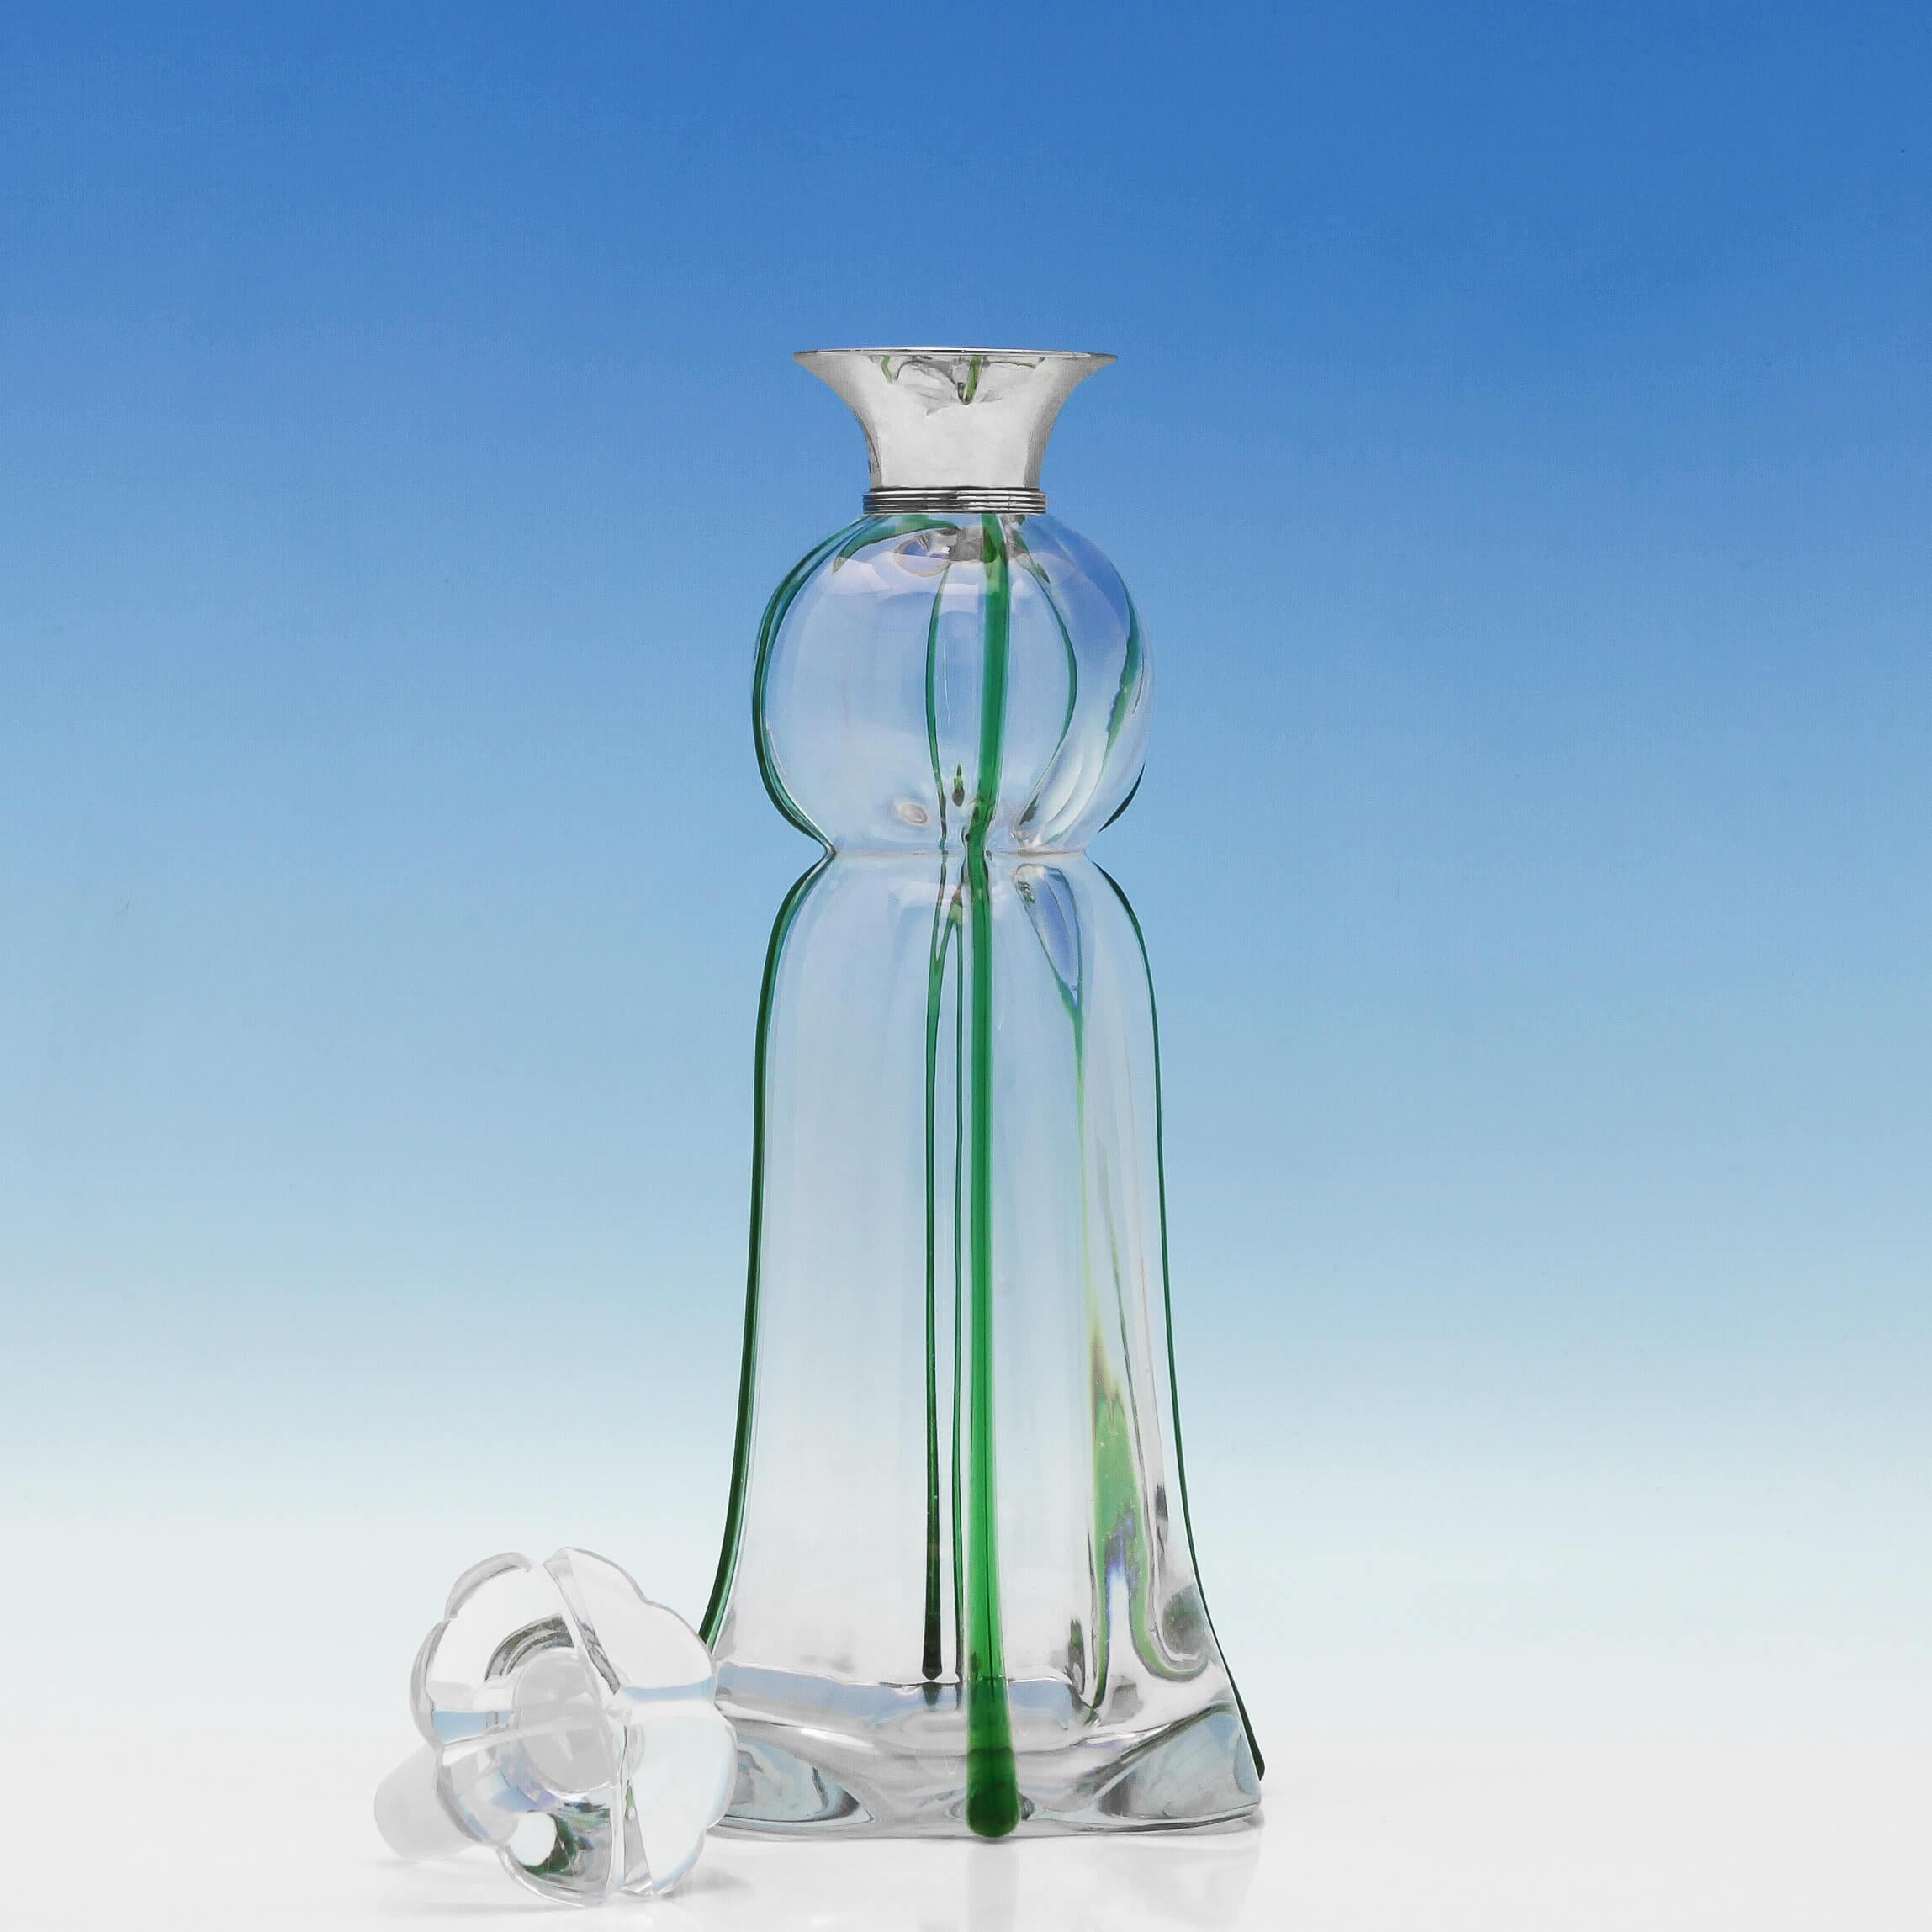 Hallmarked in London in 1900 by Heath & Middleton, this fabulous Art Nouveau, antique, sterling silver decanter features beautiful hand blown glass with green highlights, a plain reeded silver collar and a flower shaped stopper. The decanter is 12